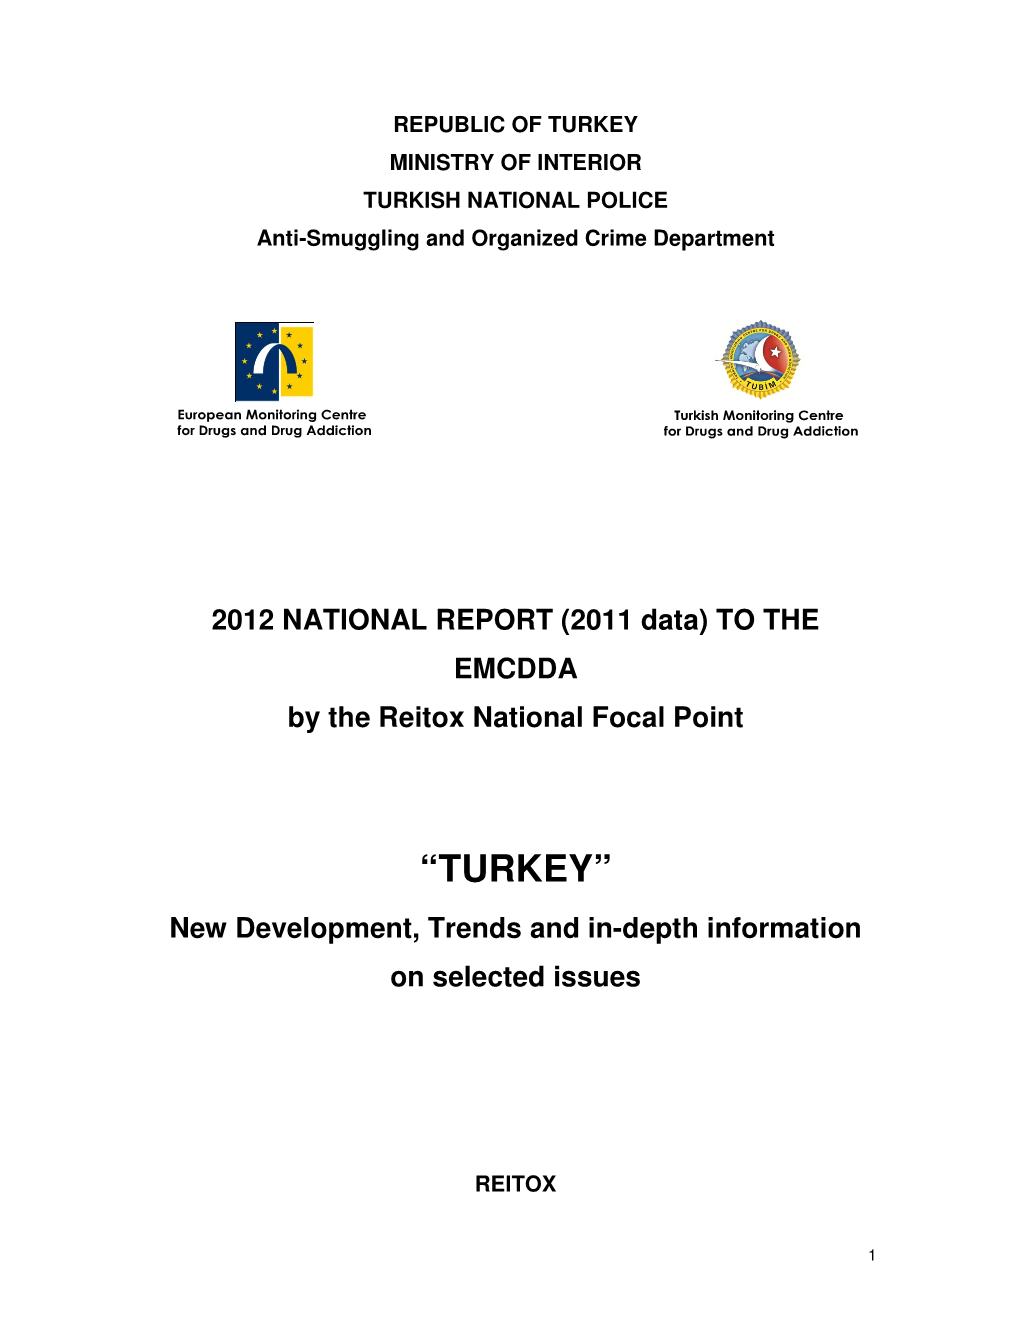 “TURKEY” New Development, Trends and In-Depth Information on Selected Issues